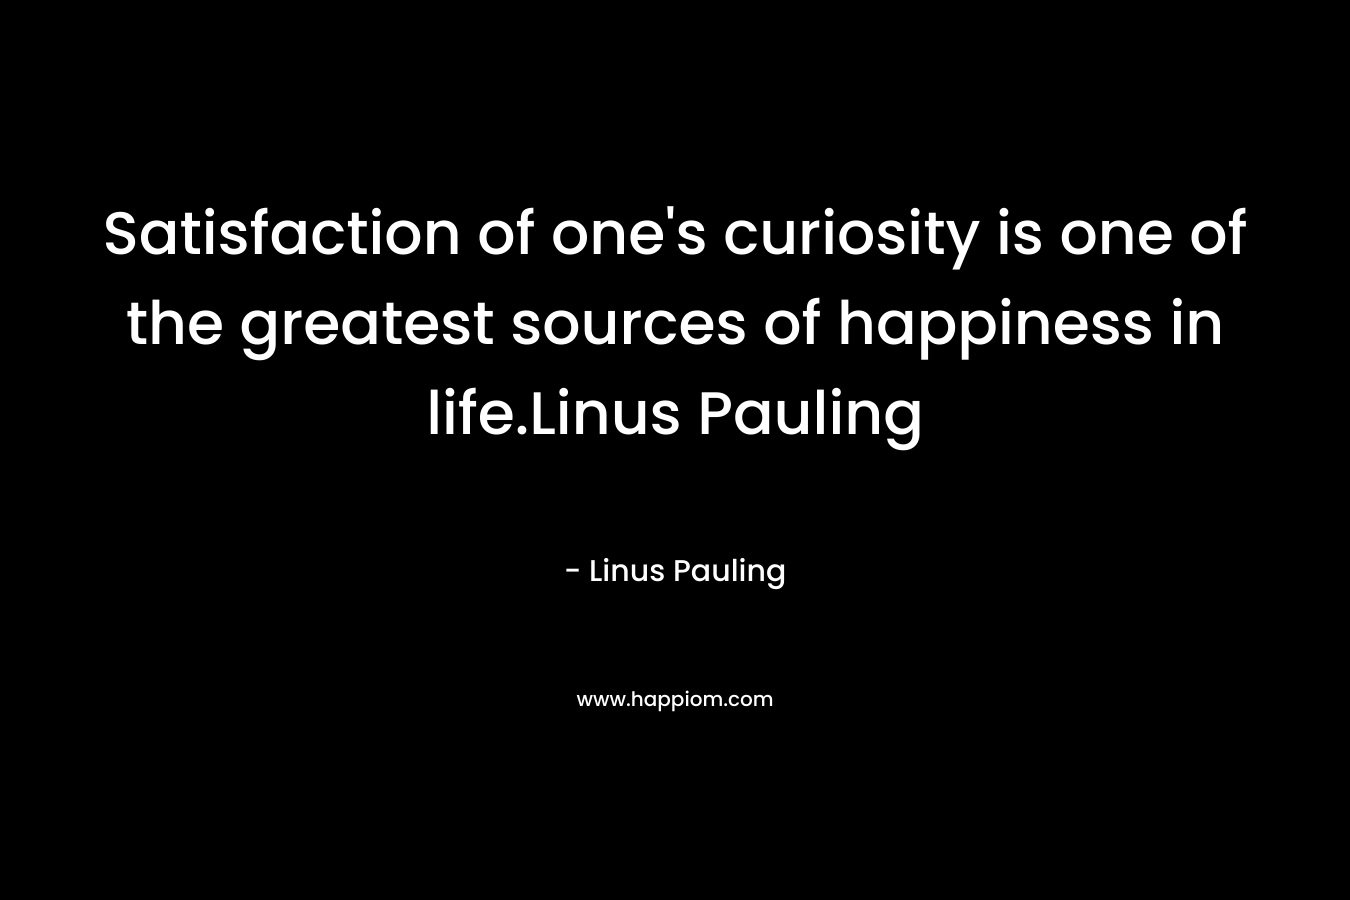 Satisfaction of one's curiosity is one of the greatest sources of happiness in life.Linus Pauling